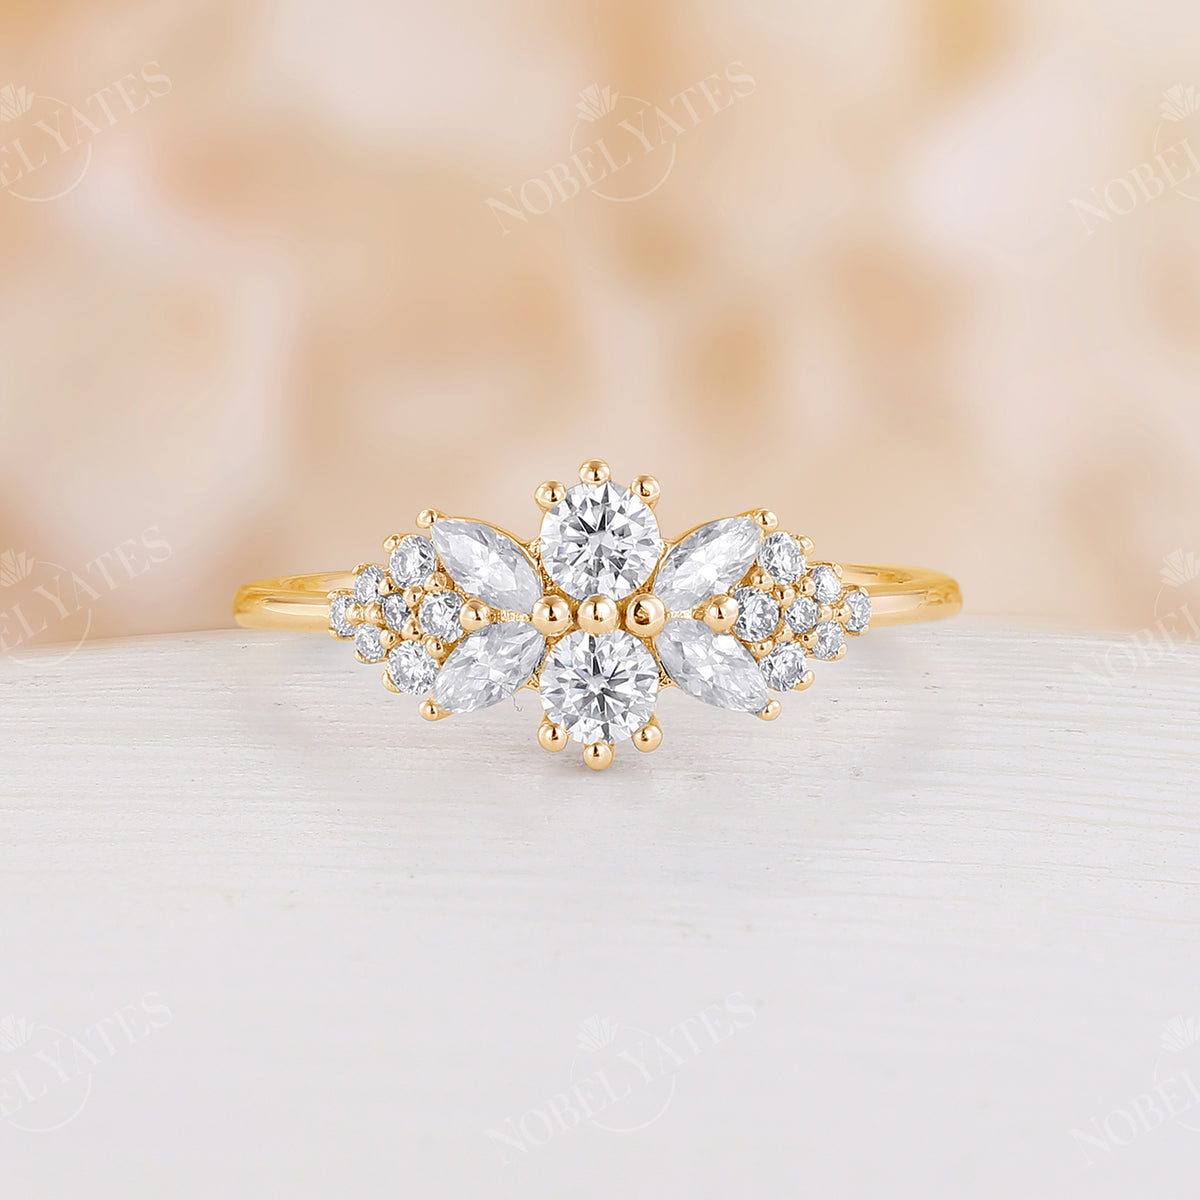 Unique Moissanite Engagement Ring Side Stone Rose Gold